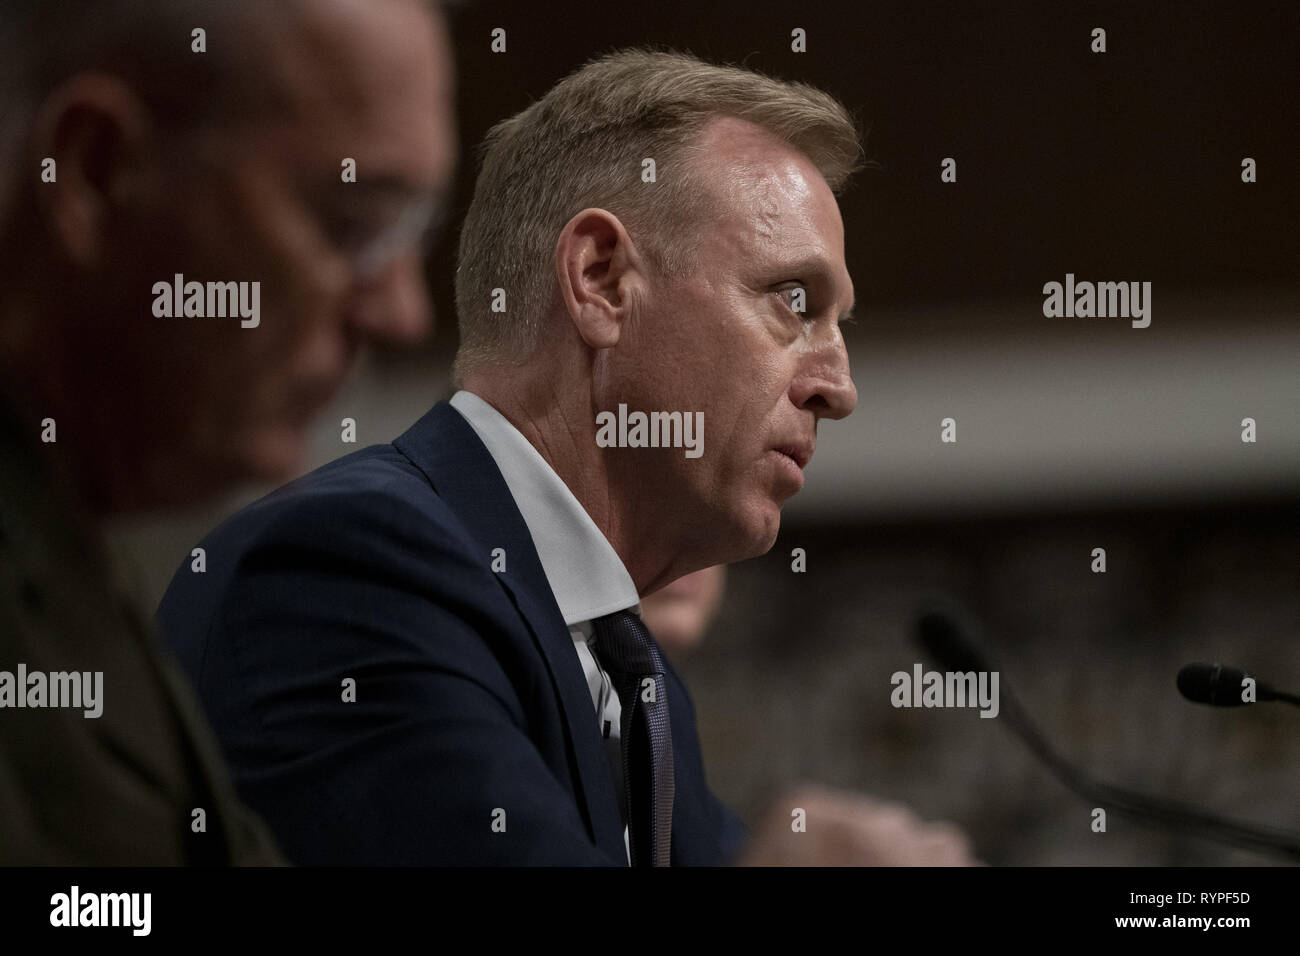 Washington, District of Columbia, USA. 14th Mar, 2019. PATRICK M. SHANAHAN, Acting Secretary Of Defense, testify before the Senate Armed Services Committee Hearing: Department of Defense Budget Posture. General JOSEPH F. DUNFORD, Jr., USMC, Chairman of The Joint Chiefs of Staff, is in the foreground. Credit: Douglas Christian/ZUMA Wire/Alamy Live News Stock Photo